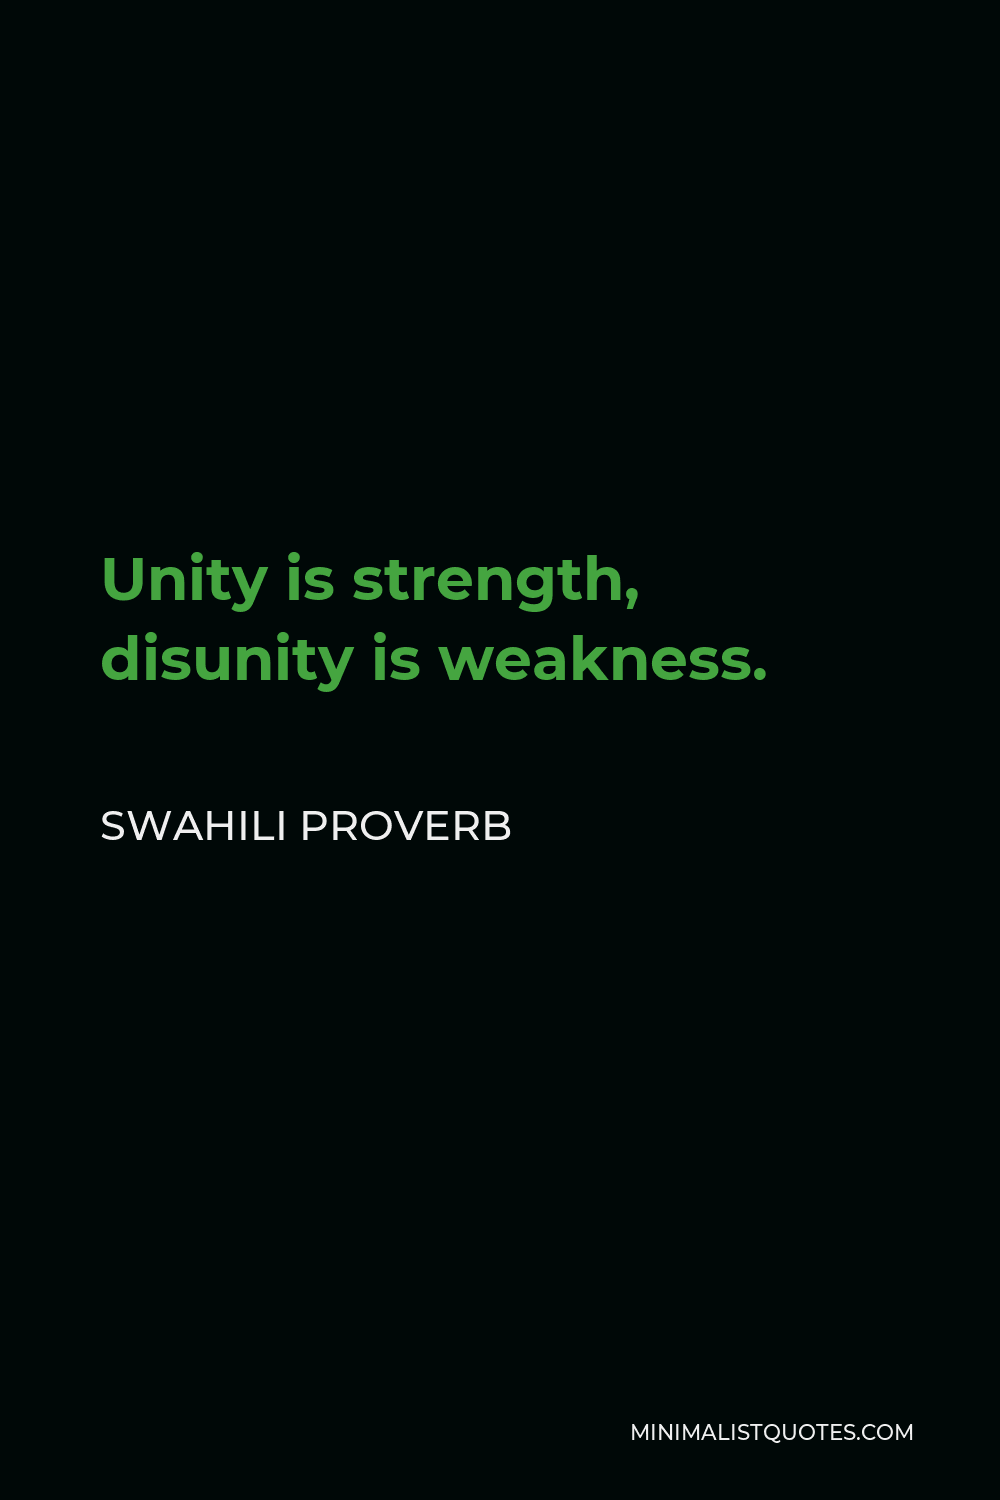 Swahili Proverb Quote - Unity is strength, disunity is weakness.